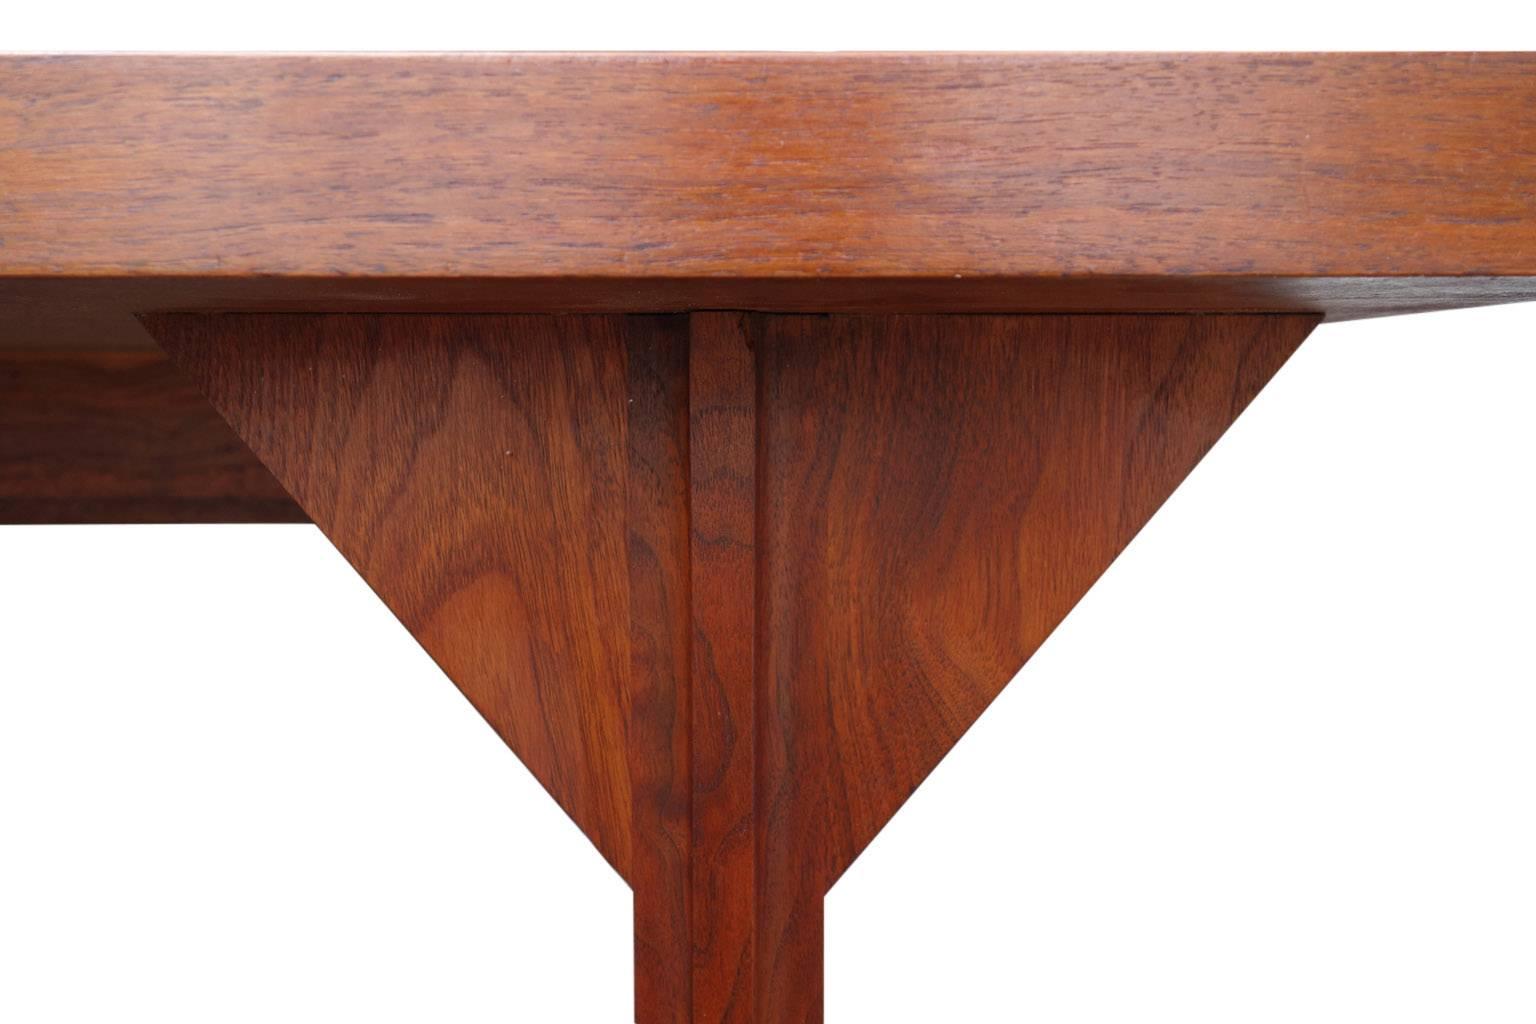 For your consideration in this georgous and amazingly crafted walnut desk by John Stuart featuring unique fluted legs with polished chrome pulls and feet. In wonderful original condition thats been well cared for and ready for use.